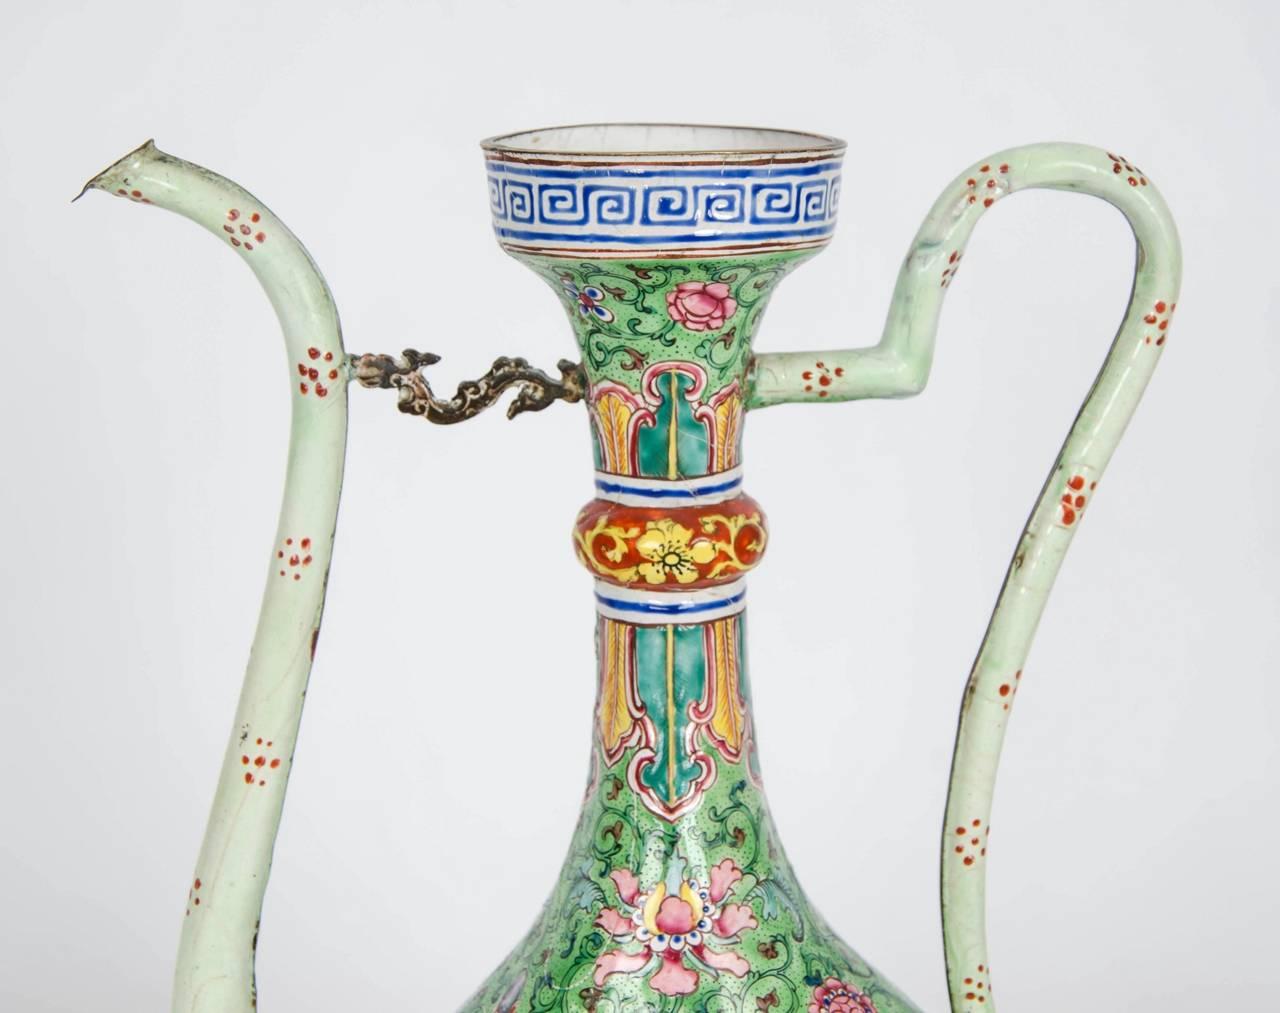 18th Century Chinese Enamel Vases with Persian Style Decorations 3